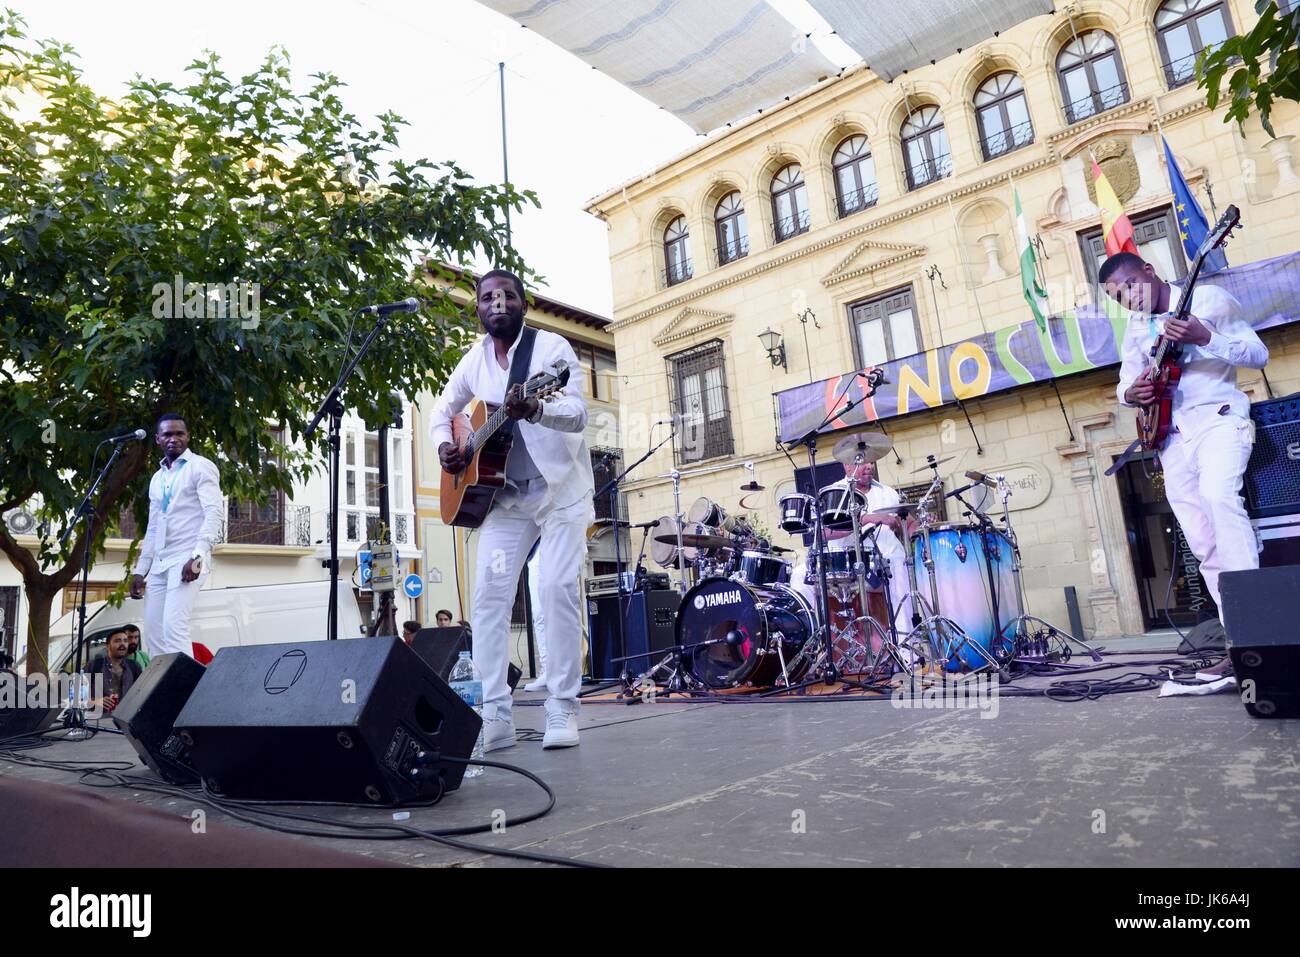 Alcala la Real, Jaen, Spain. 21st July, 2017. Etnosur festival. Toto St. Serpio Tomas 'Toto' was born in Luanda (Angola, Africa), during his performance on the stage of Etnosur. Etnosur is a festival of ethnic music that is celebrated annually in the south of Spain. M.Ramirez/Alamy Live News Stock Photo